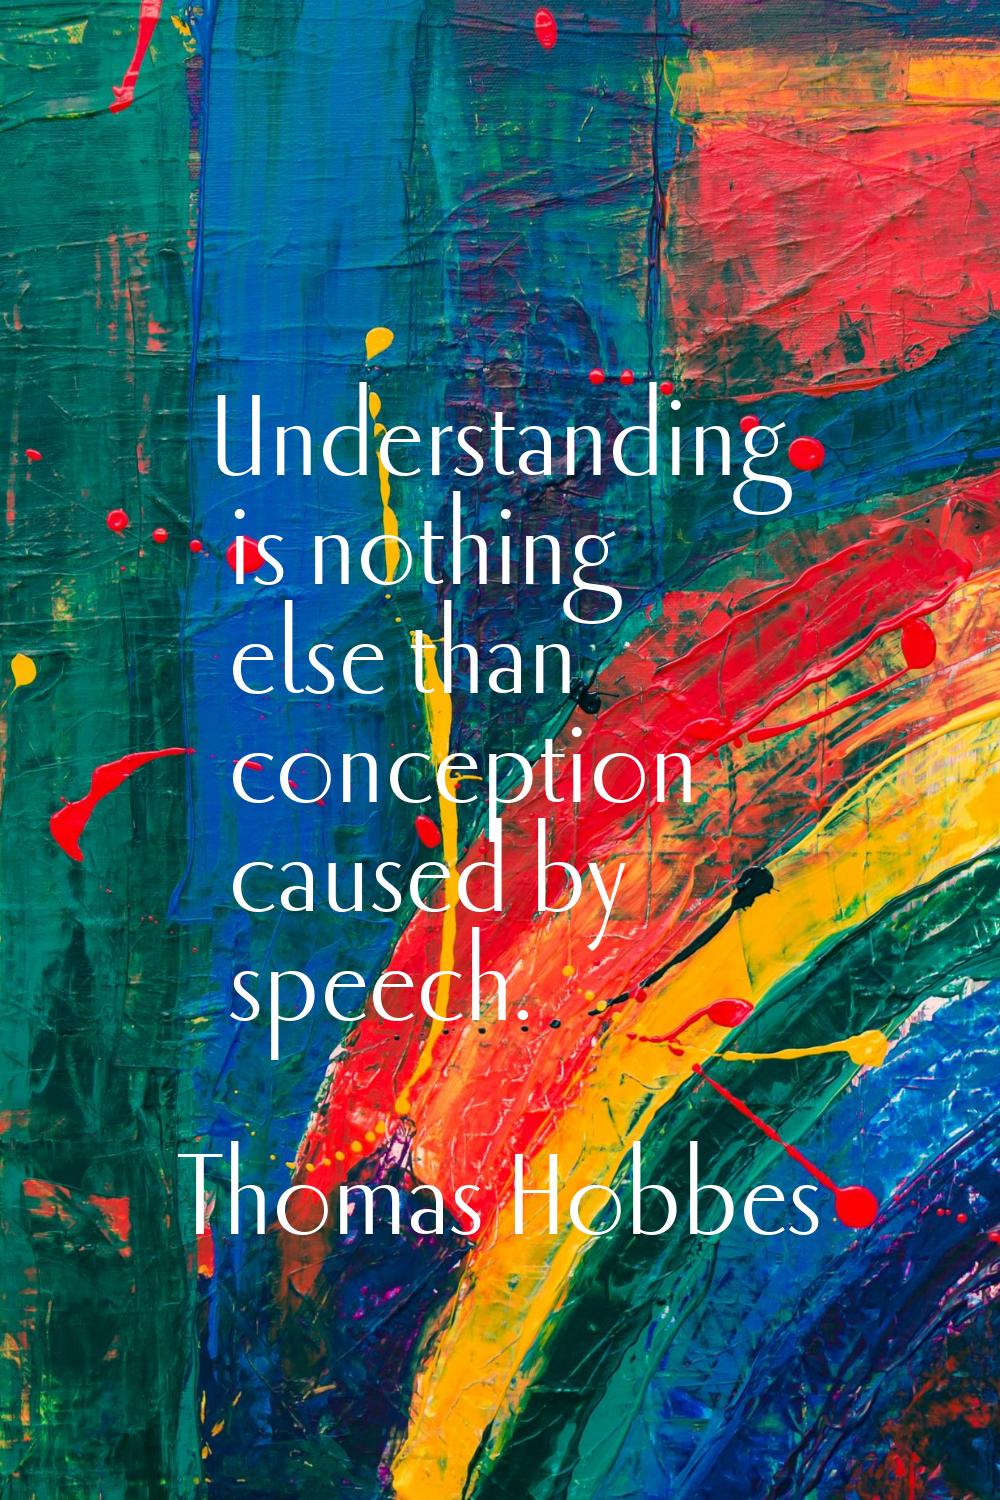 Understanding is nothing else than conception caused by speech.